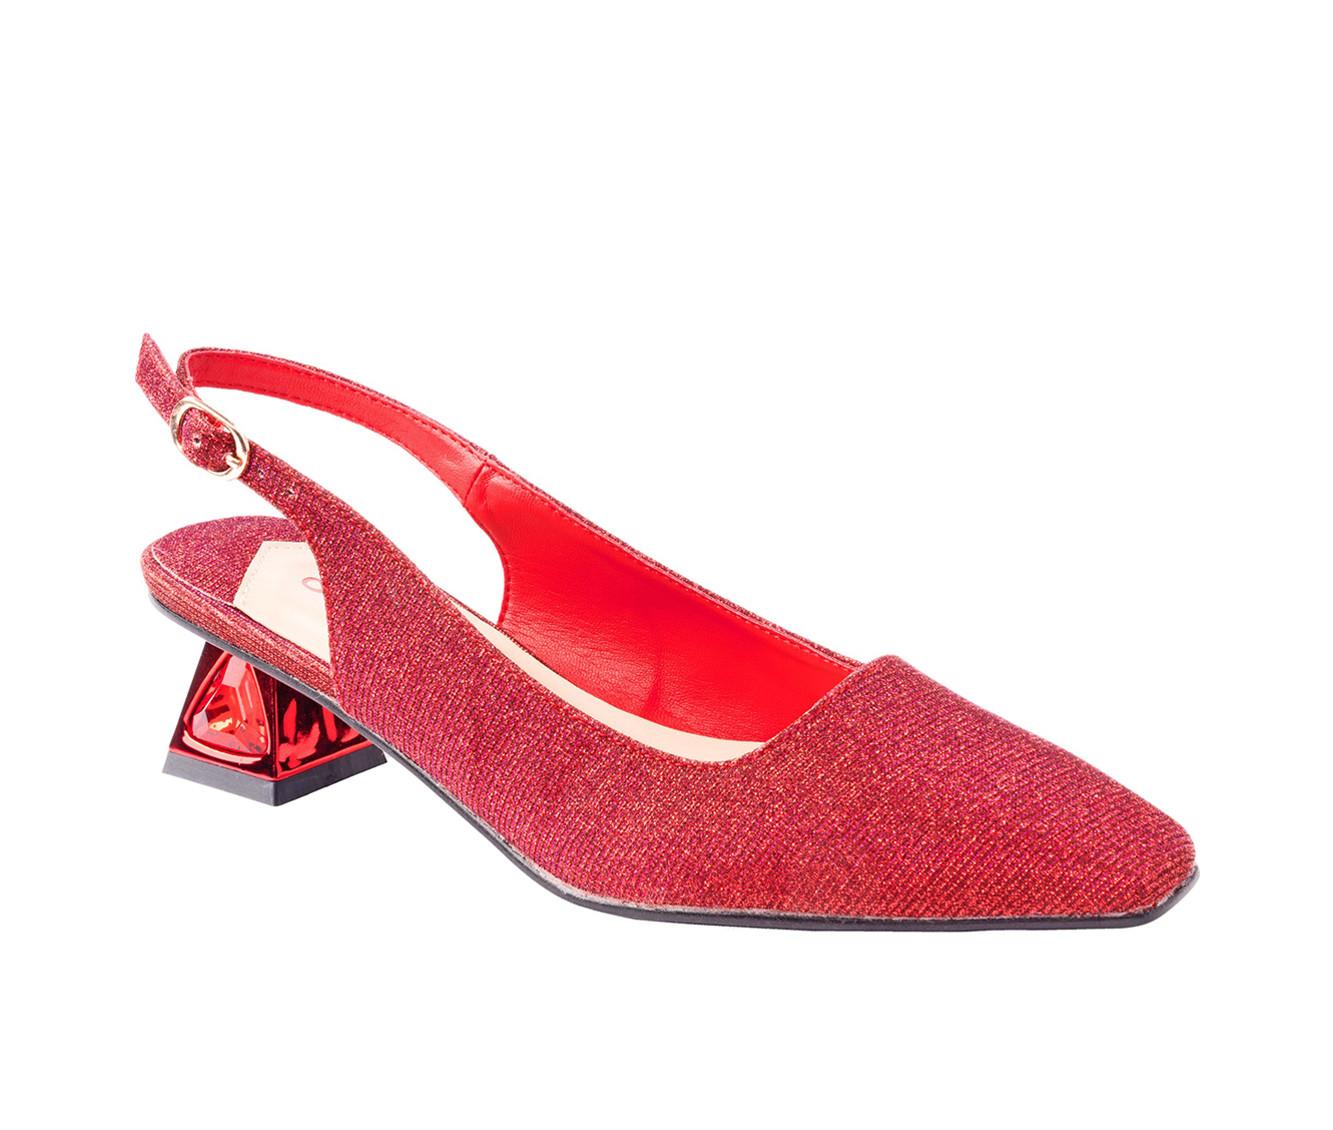 Women's Lady Couture Ruby Pumps